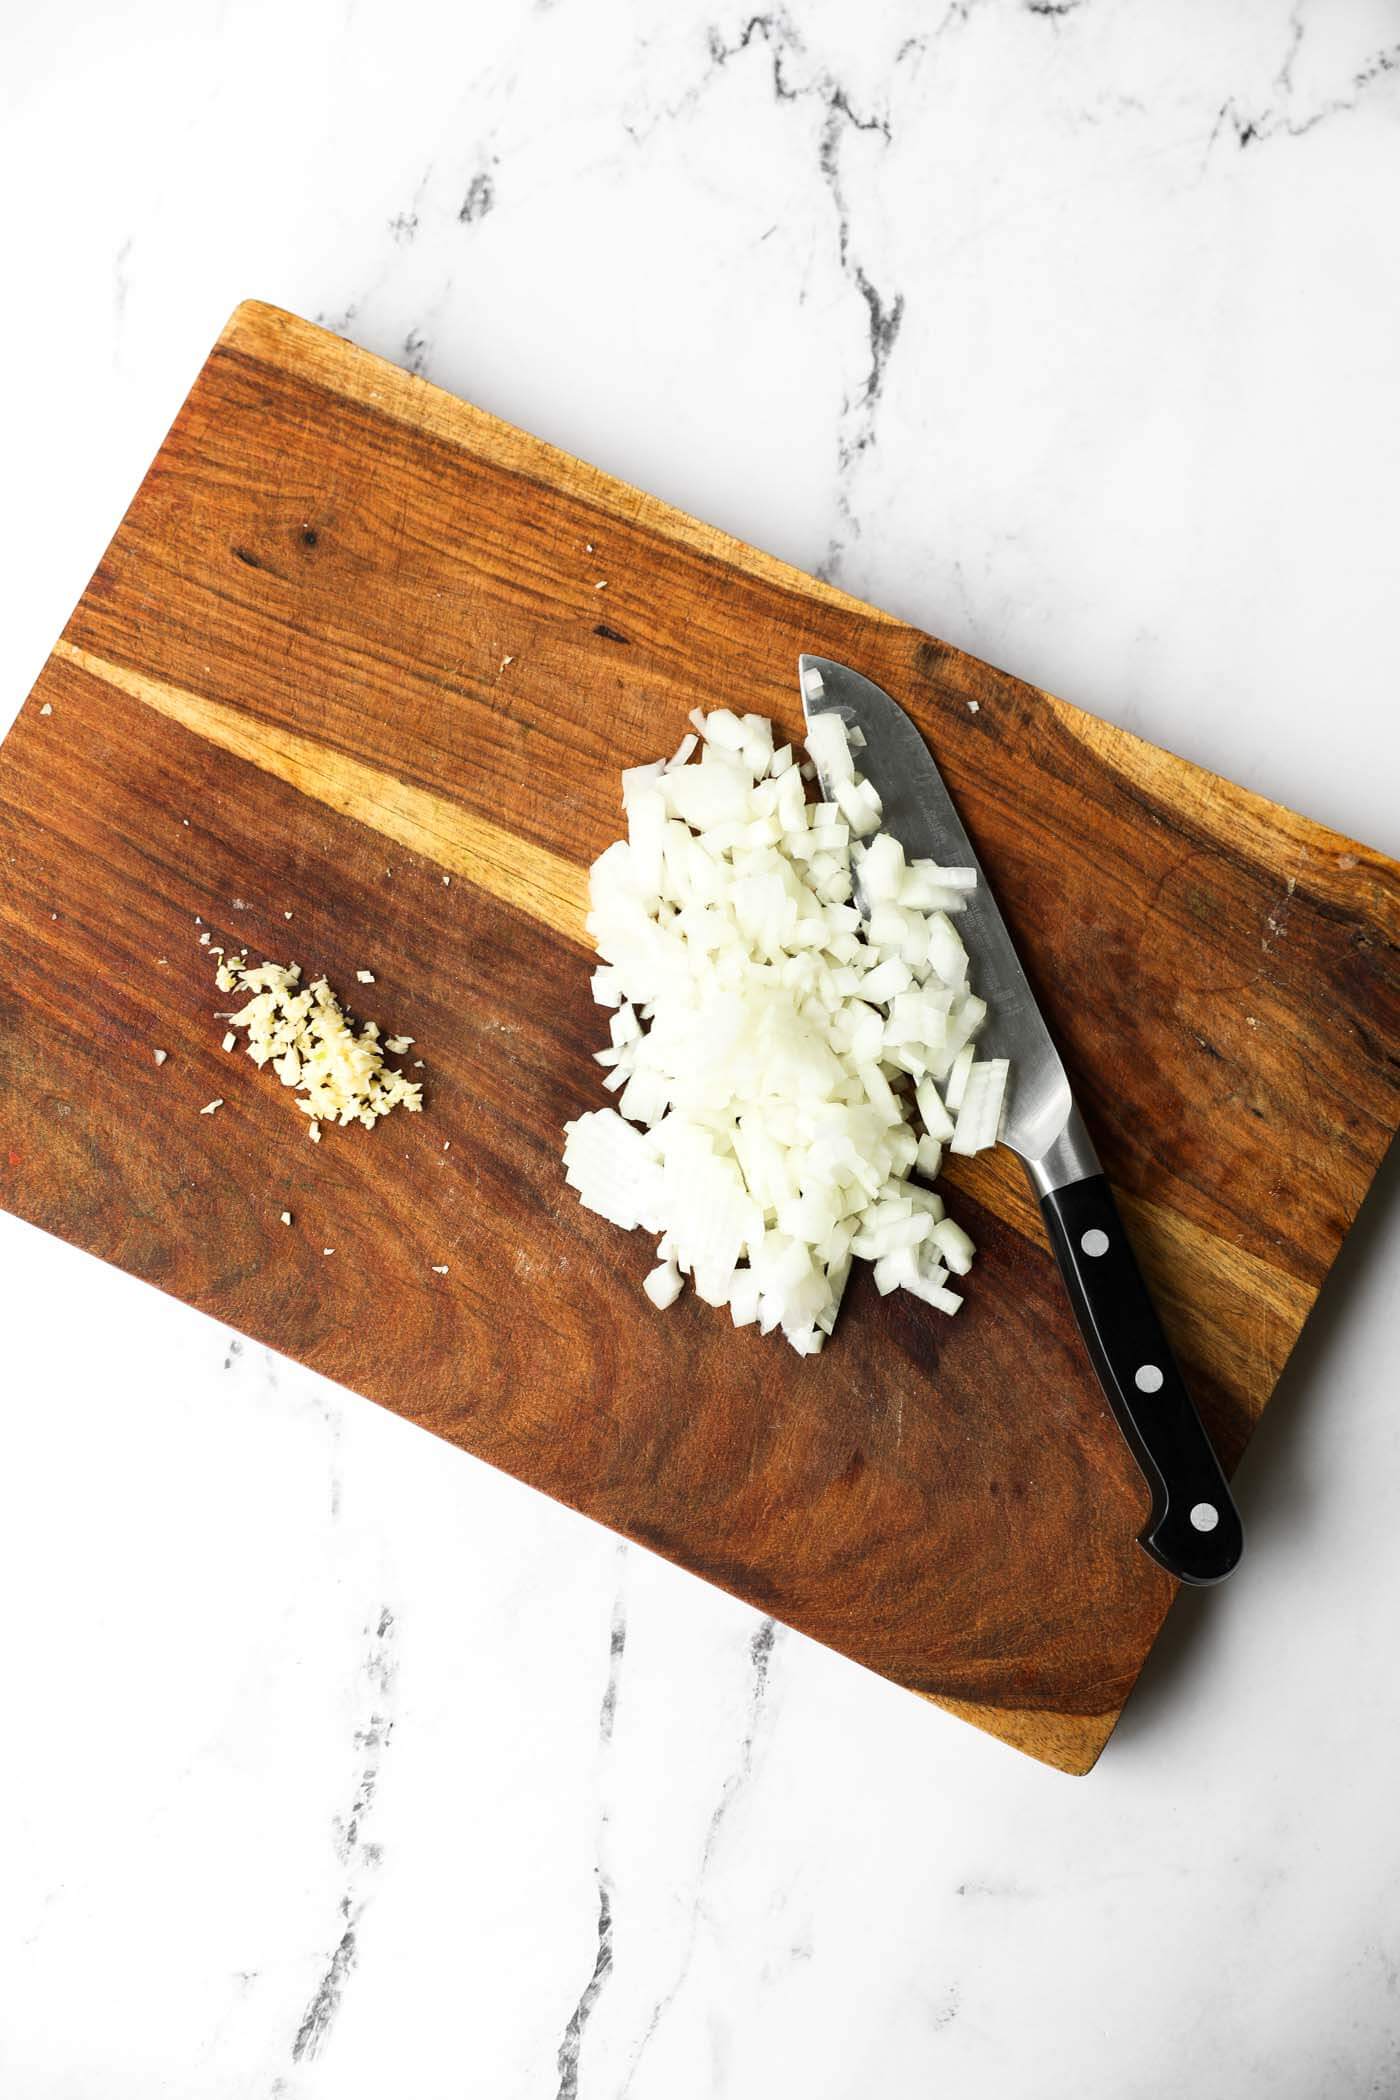 A cutting board with minced garlic and chopped onion on it with a knife partially covered by the chopped onion.